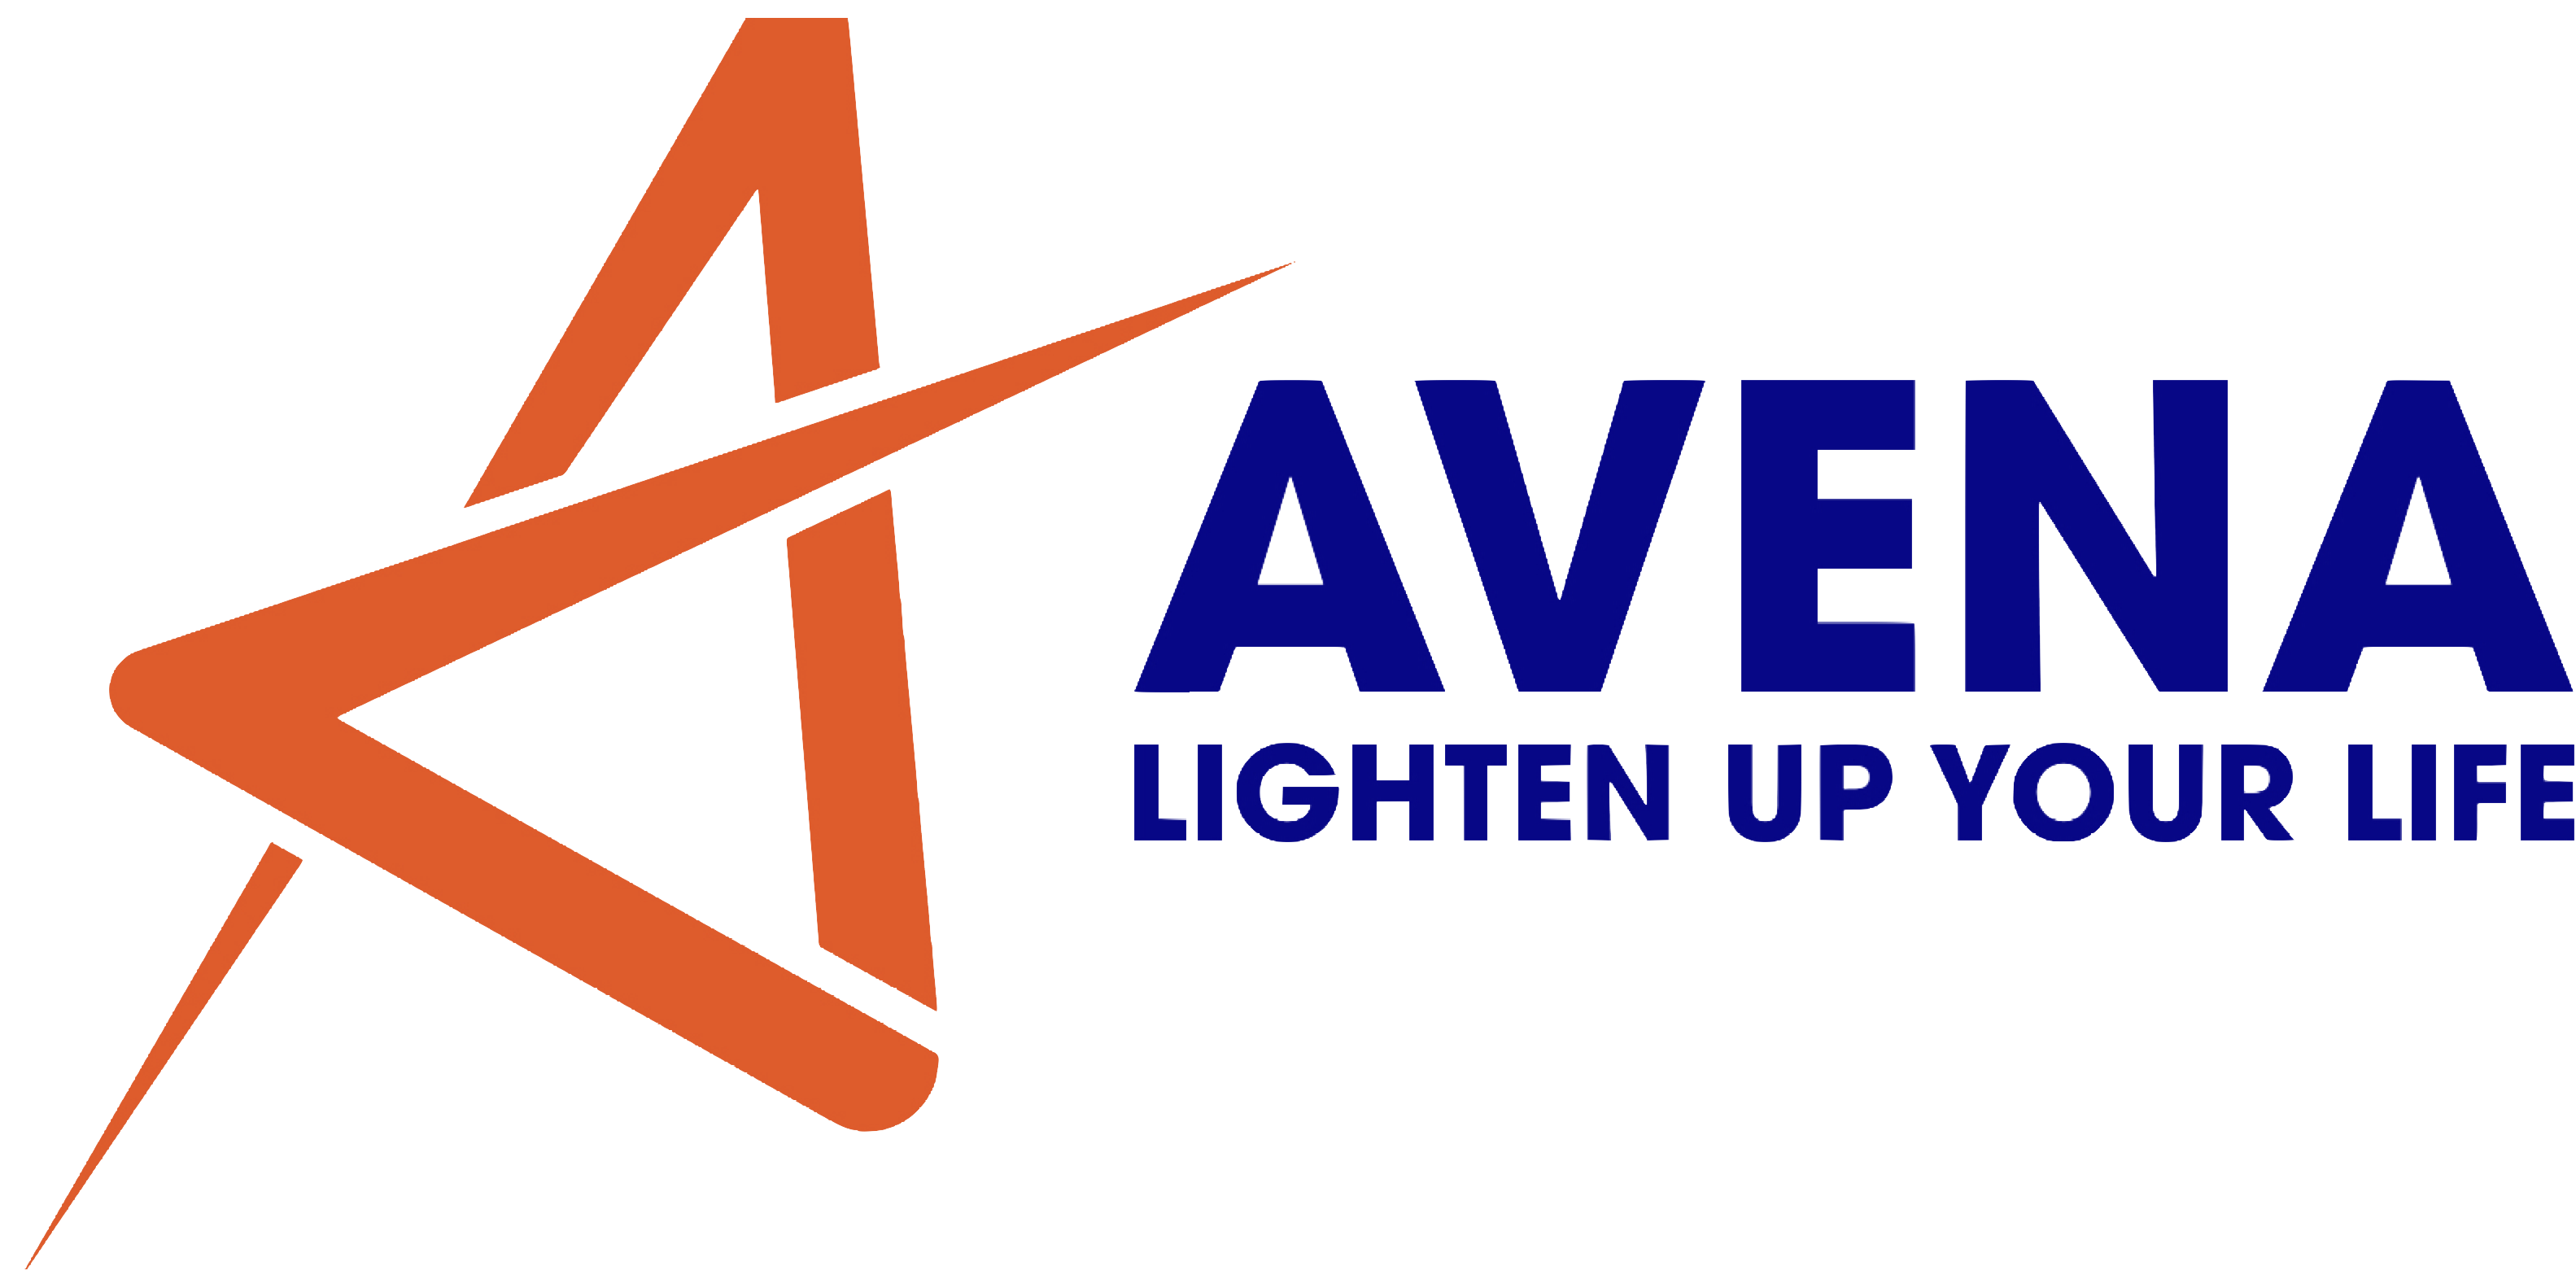 Port Said Co. for Electrical Industries – Avena Group